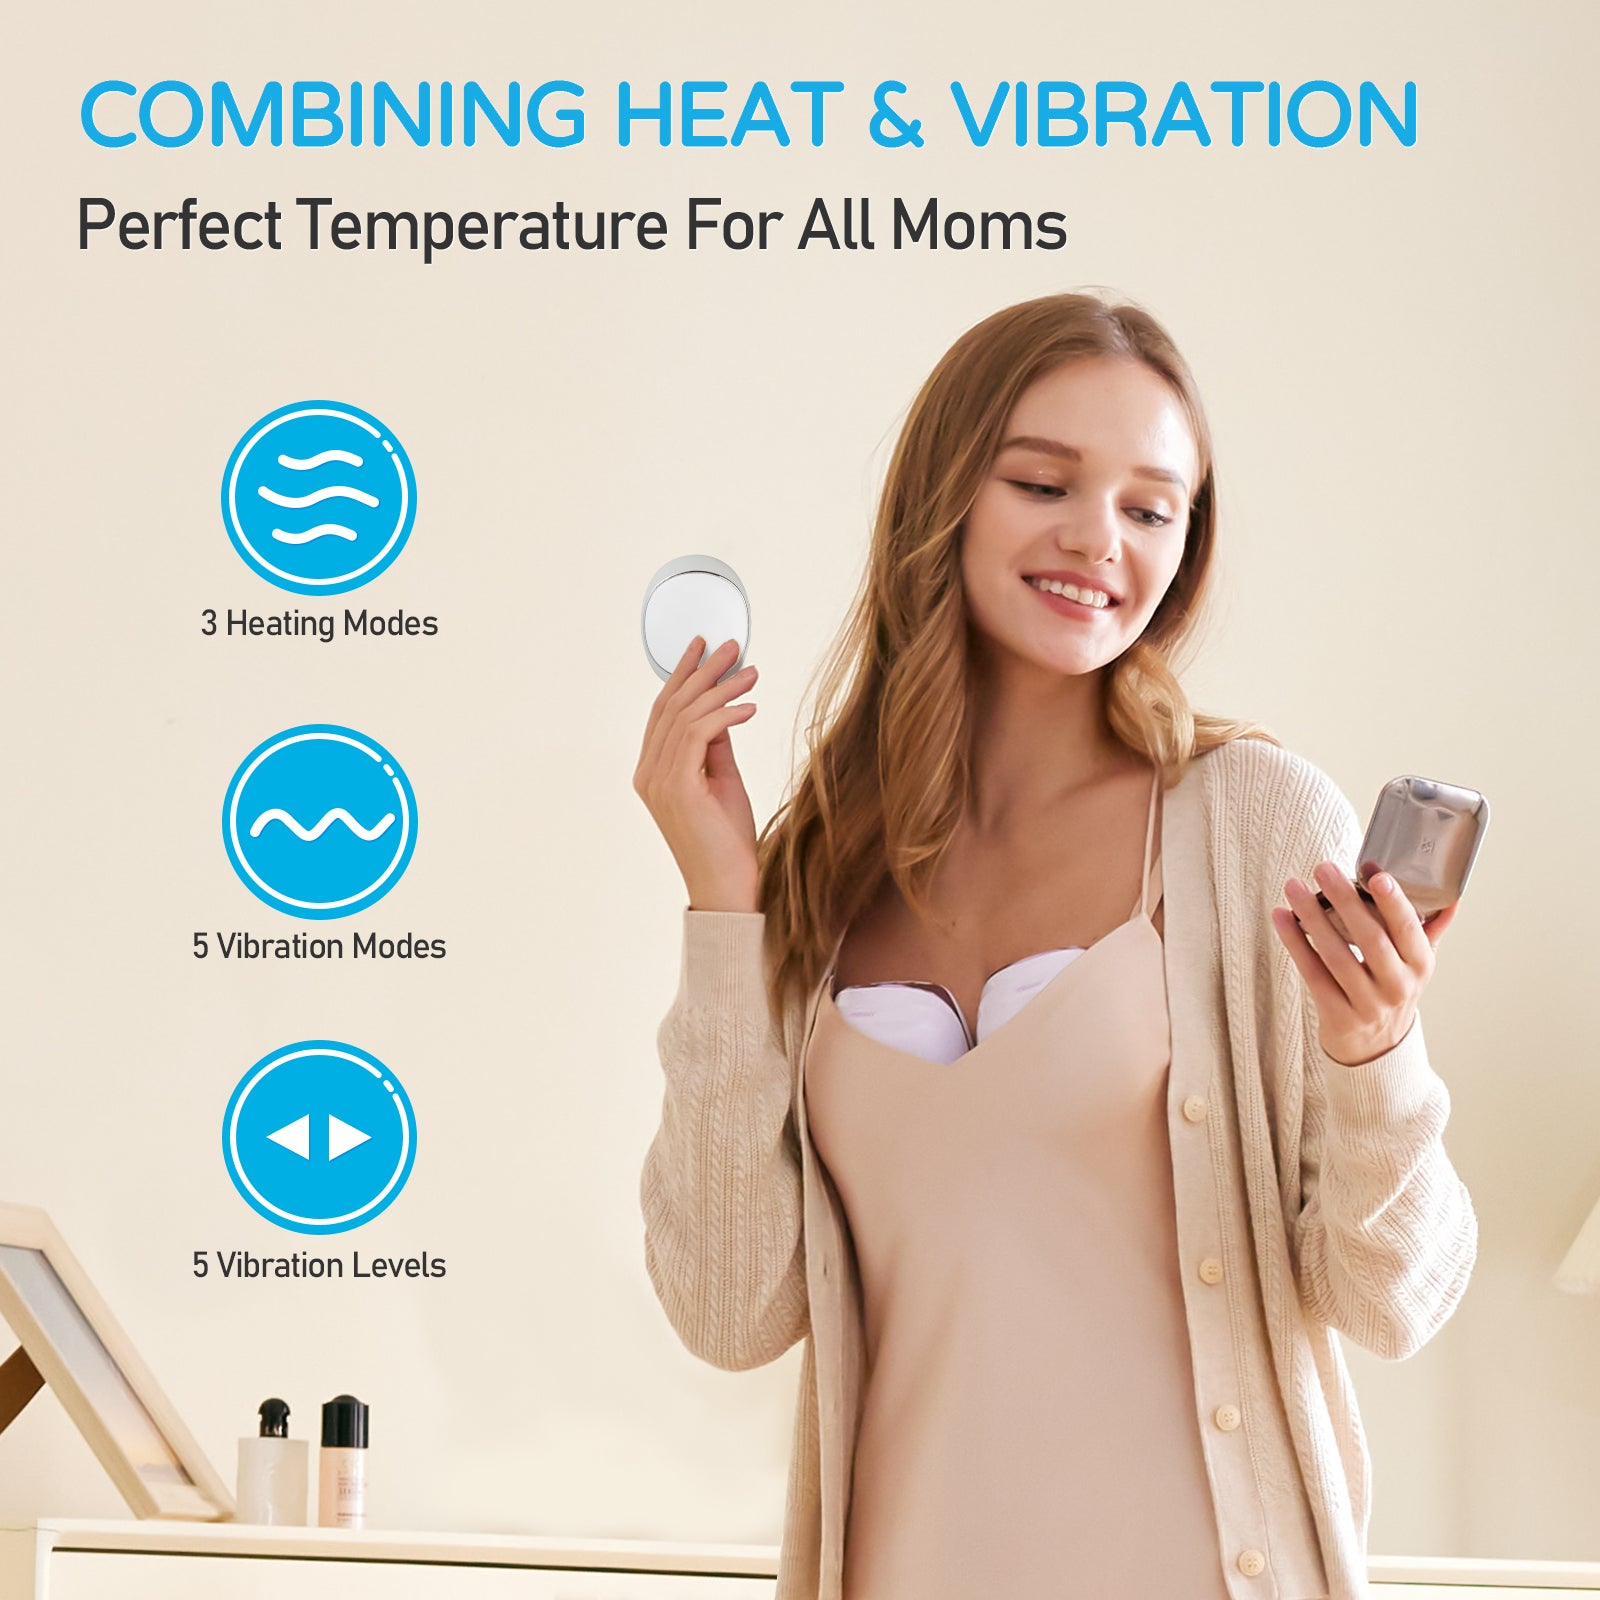 Lactation Massager, Soft & Comfortable Breast Massager for Pumping,  Breastfeeding, Heat & Vibration for Improve Milk Flow, Clogged Ducts 